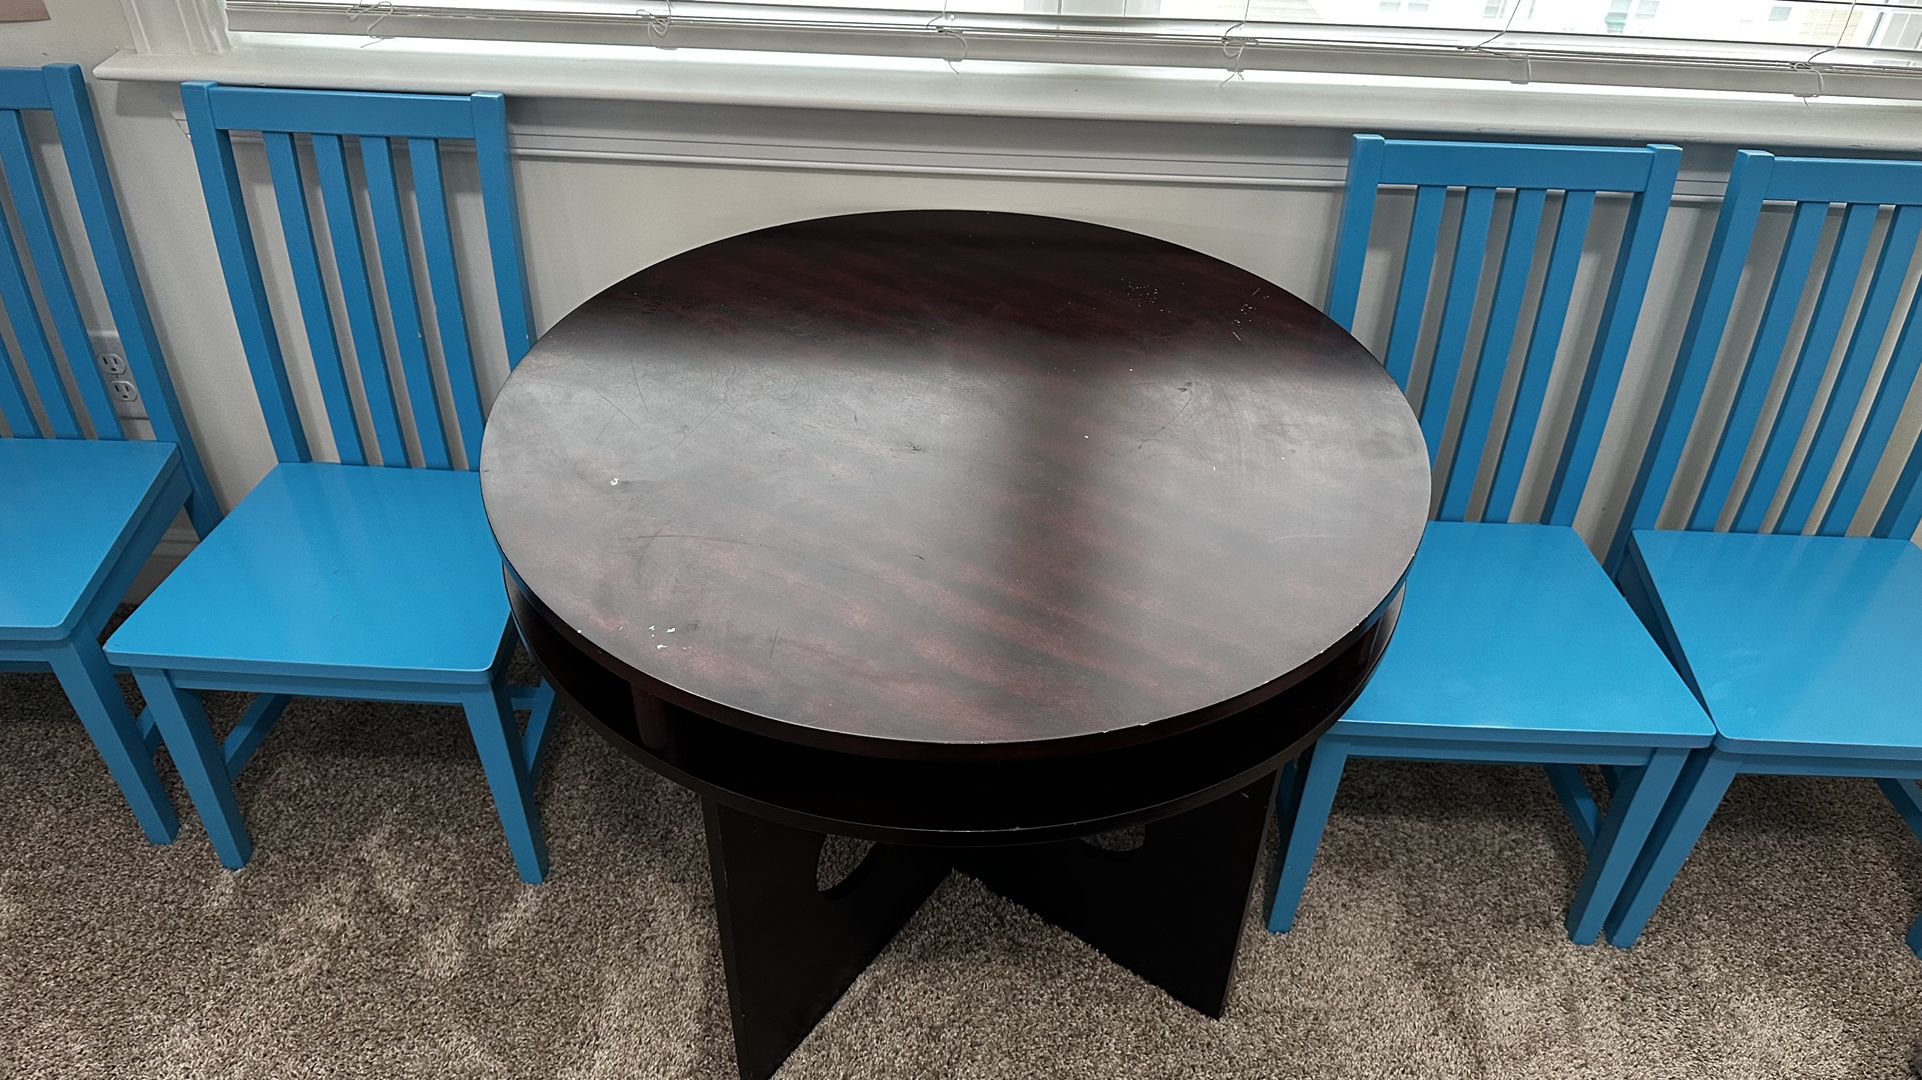 Rooms To Go Kids Round Desk Witu 4 Table $35